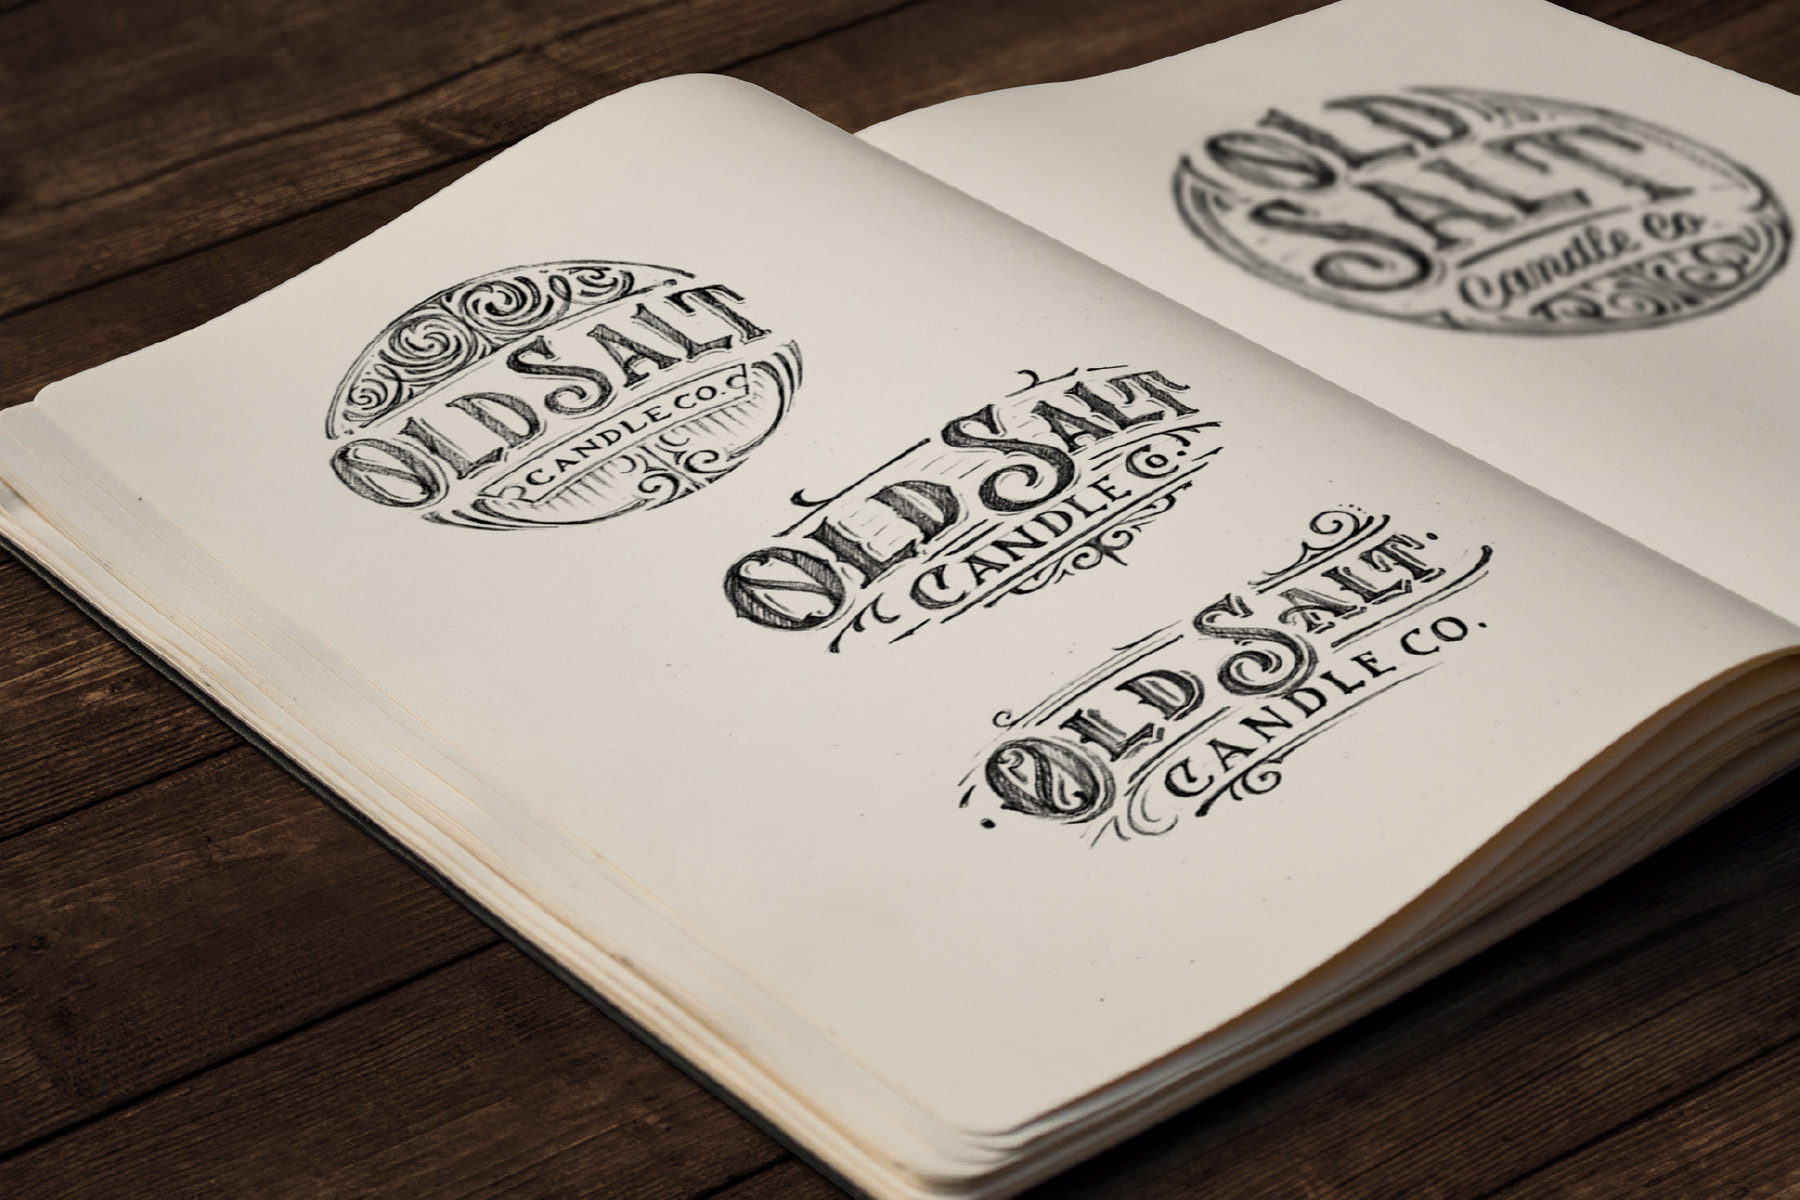 Victorian logos sketches in notebook